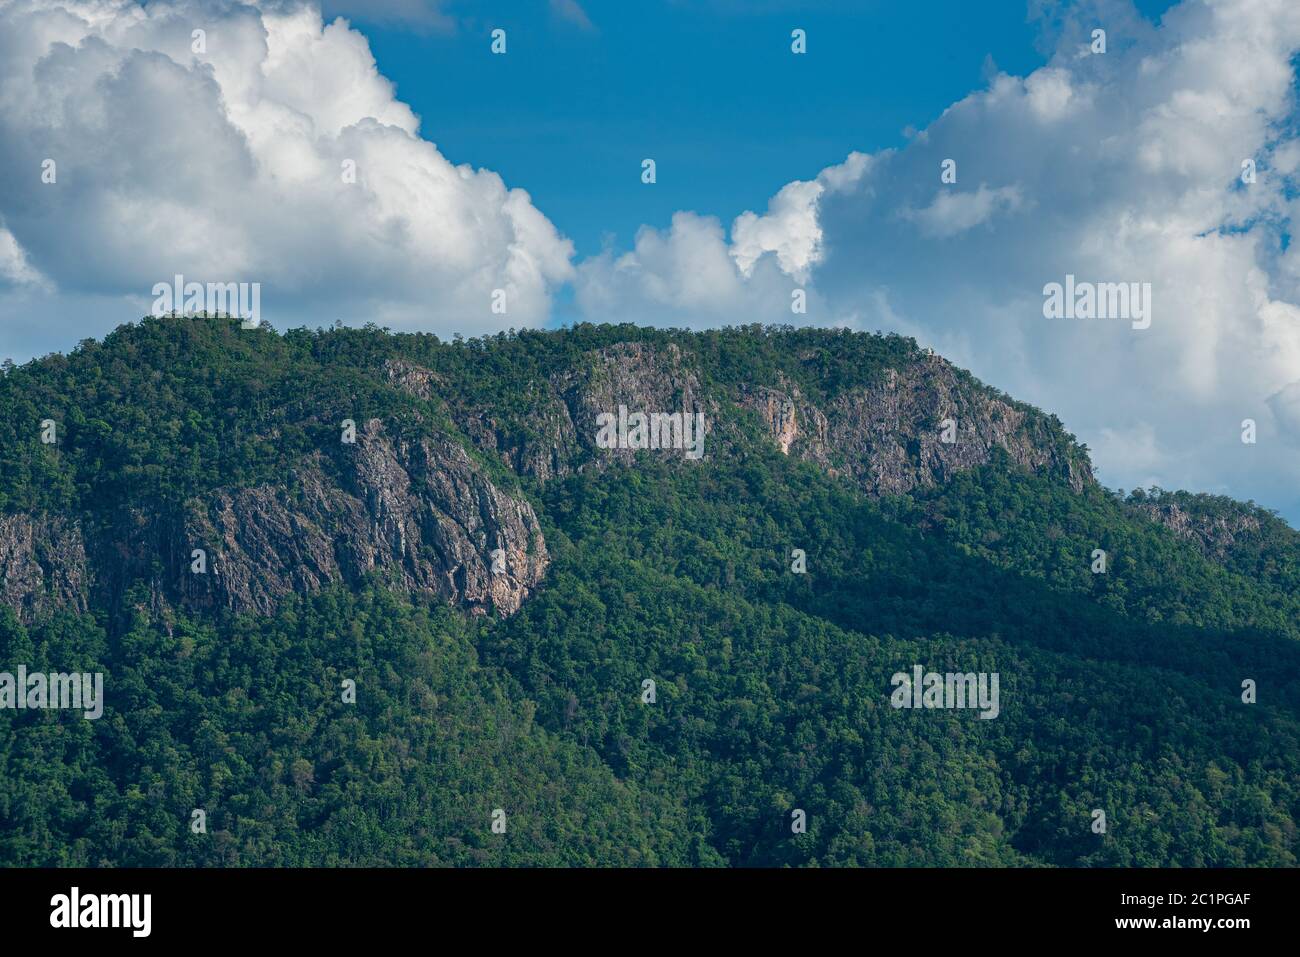 Green mountain with cliff texture in blue sky cloudy day Stock Photo